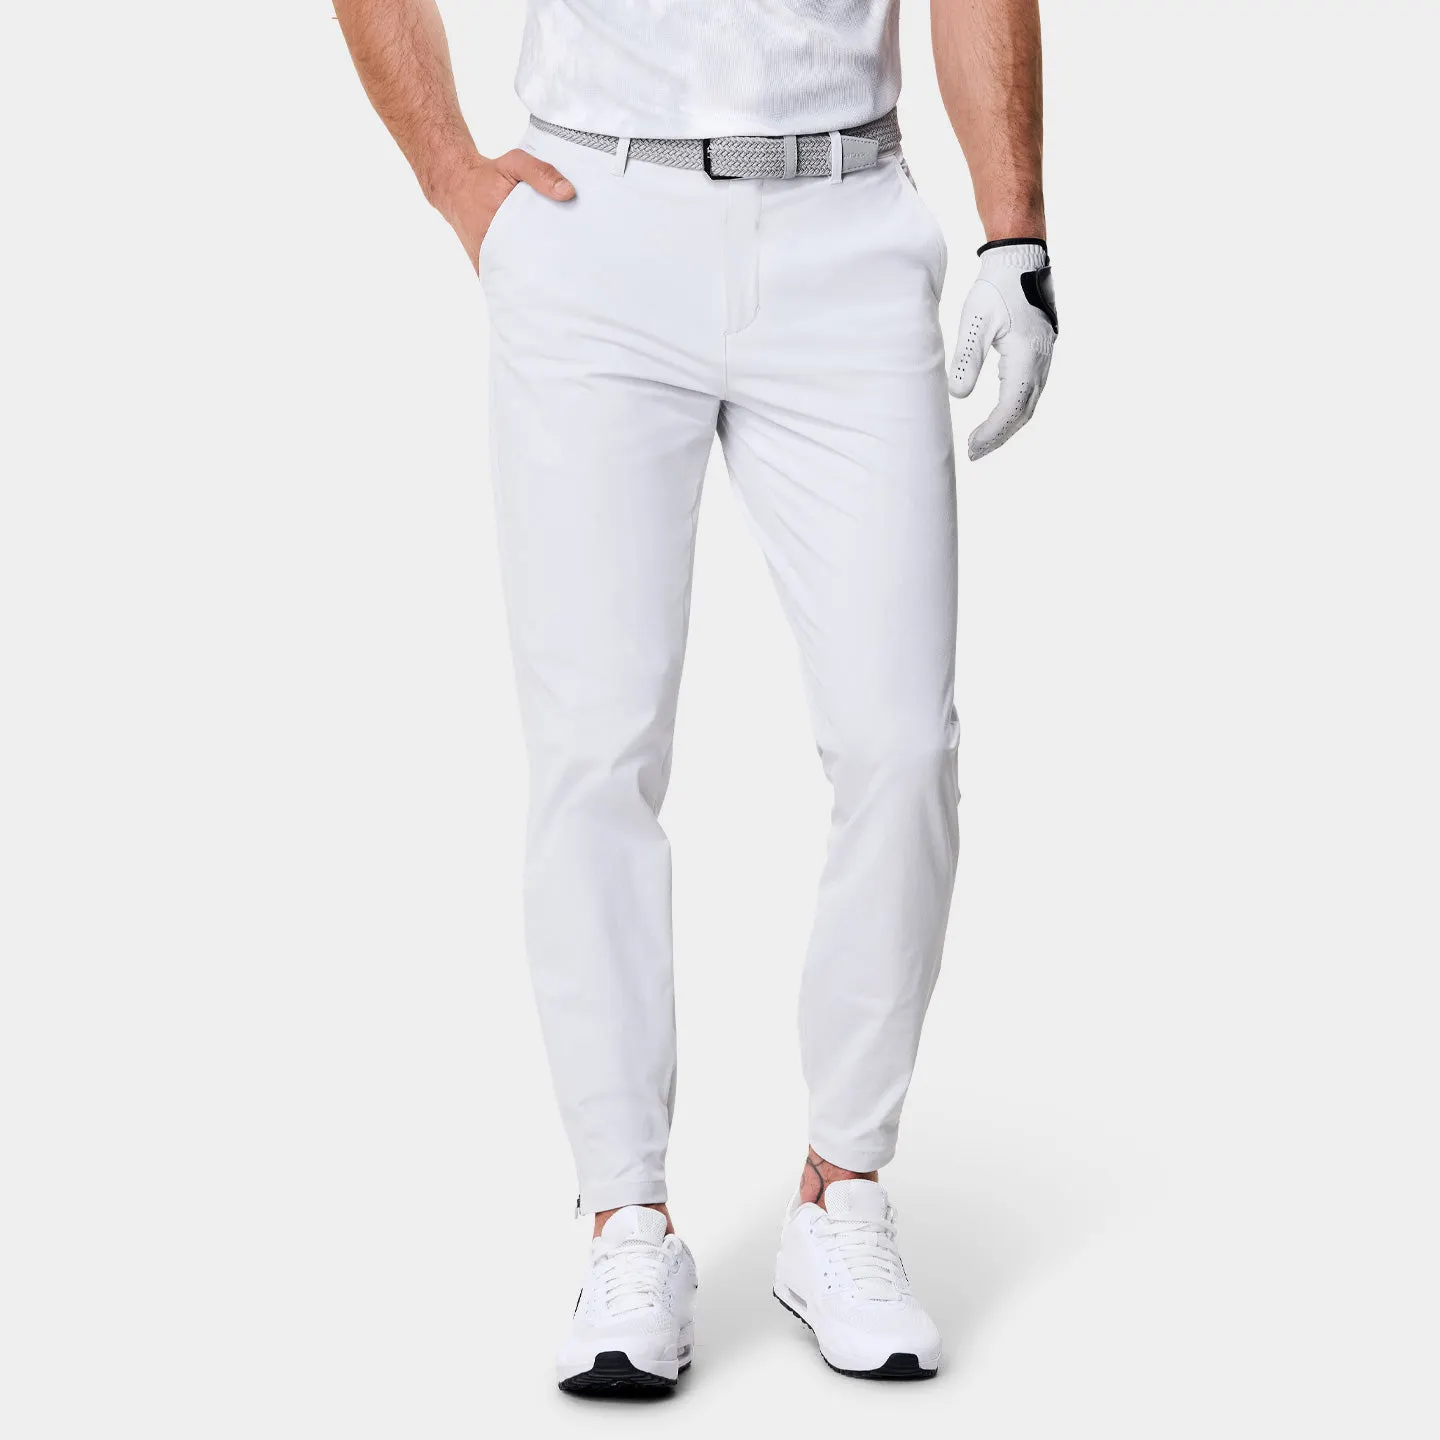 Luxury custom high quality white four way stretch jogger trousers stretch quick dry lightweight casual chino golf pants